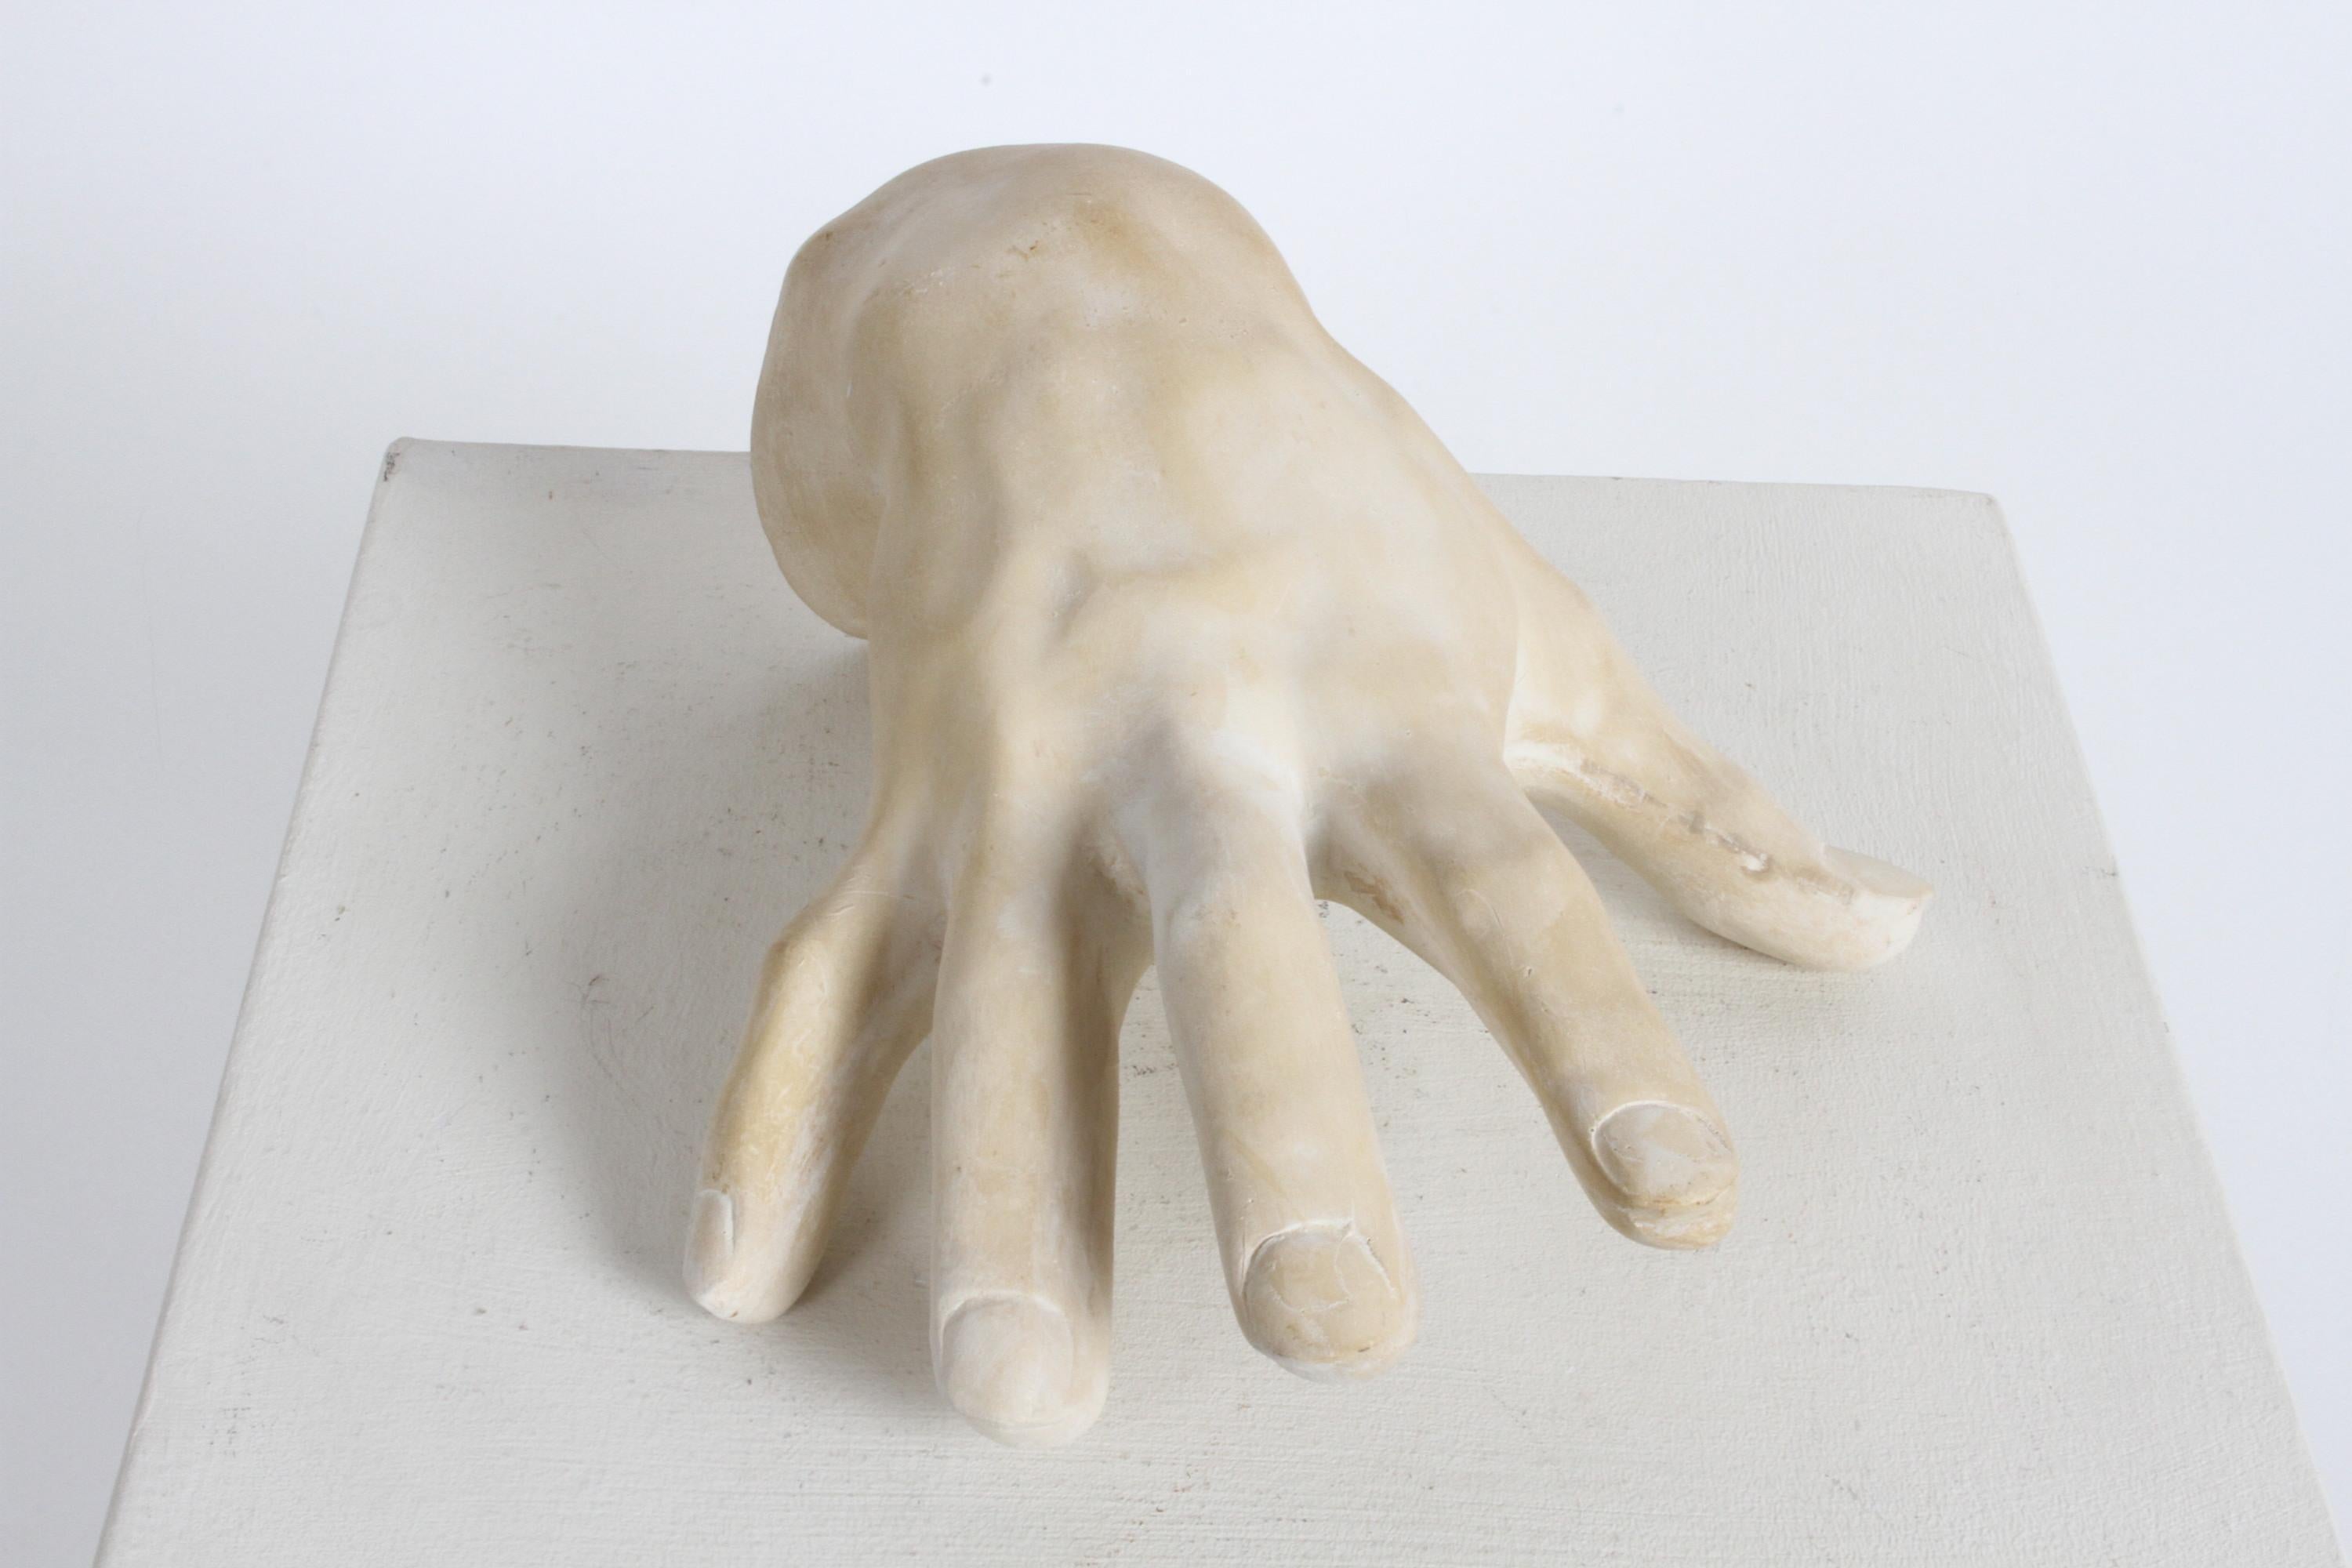 Large 1970s Plaster Artist Hand Study Table Sculpture, Style of John Dickinson For Sale 9